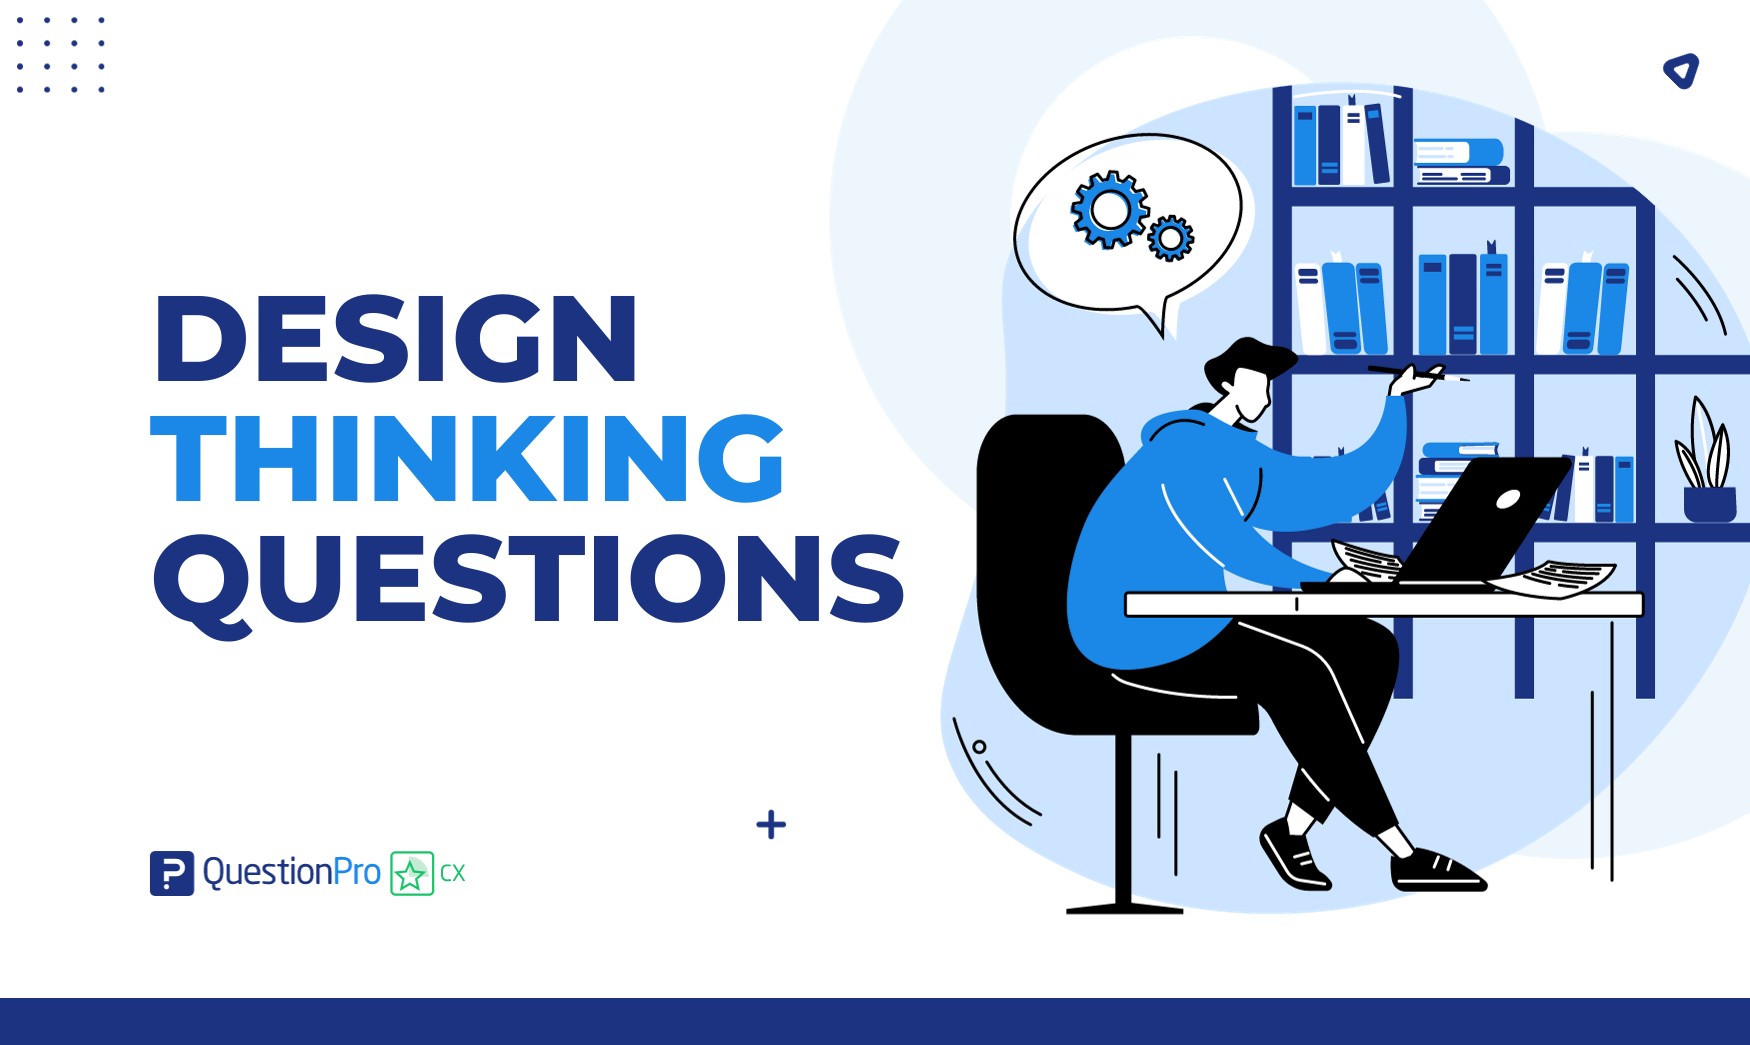 Design thinking questions set your organization on a path to lasting success. Customer experience innovation is just a question away.